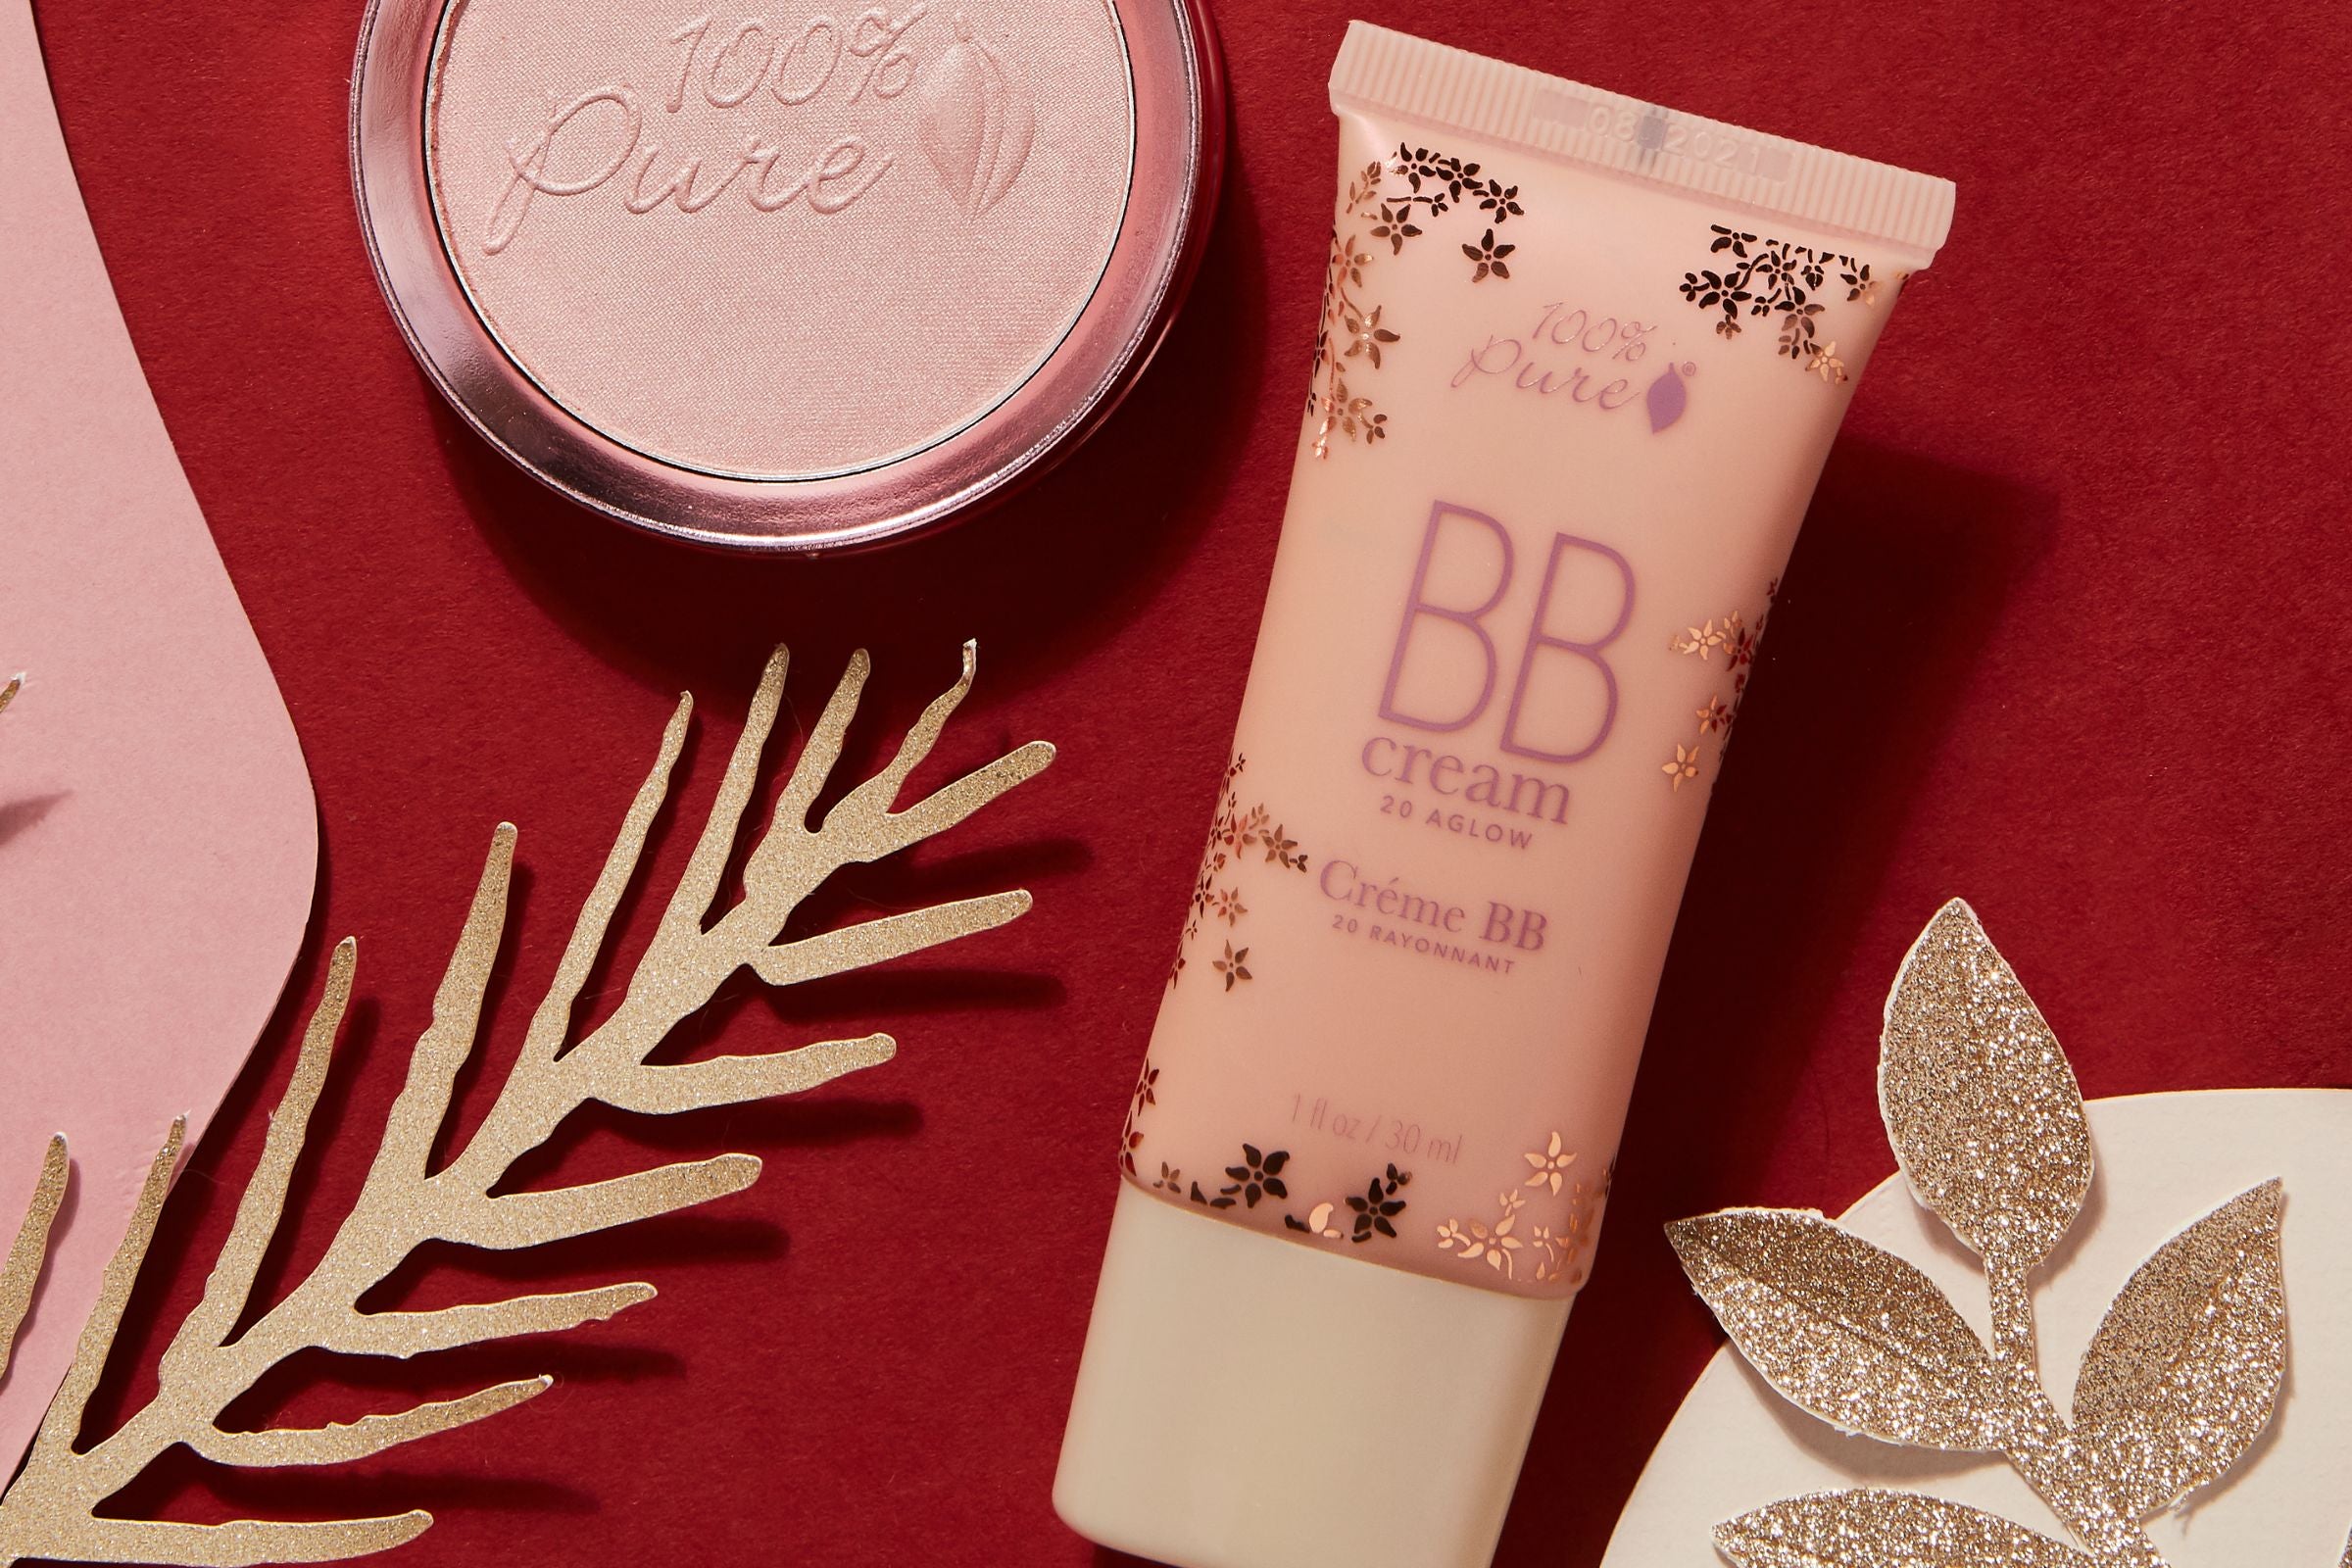 BB vs. CC Cream: What's the Difference? – purlisse